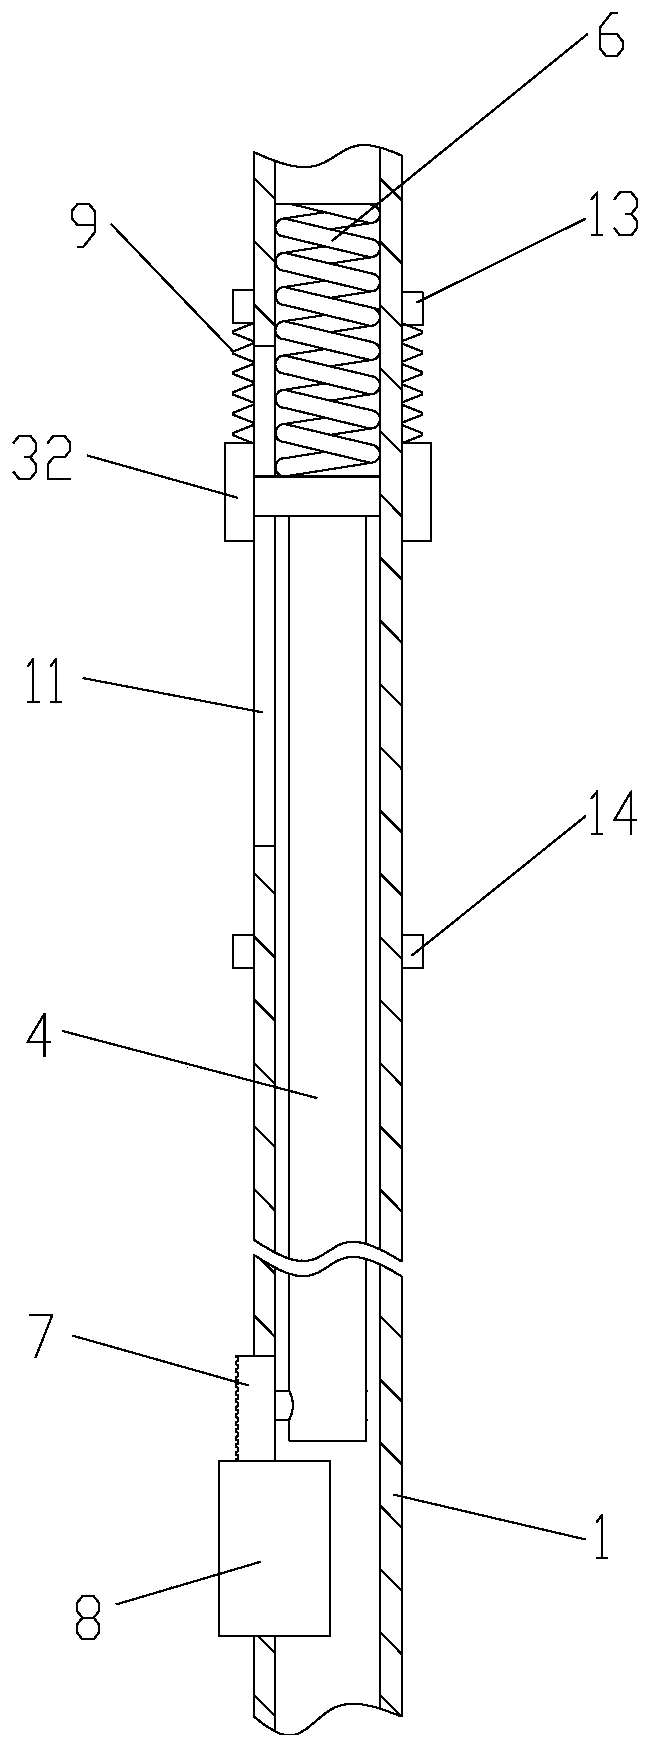 Clothes supporting rod structure